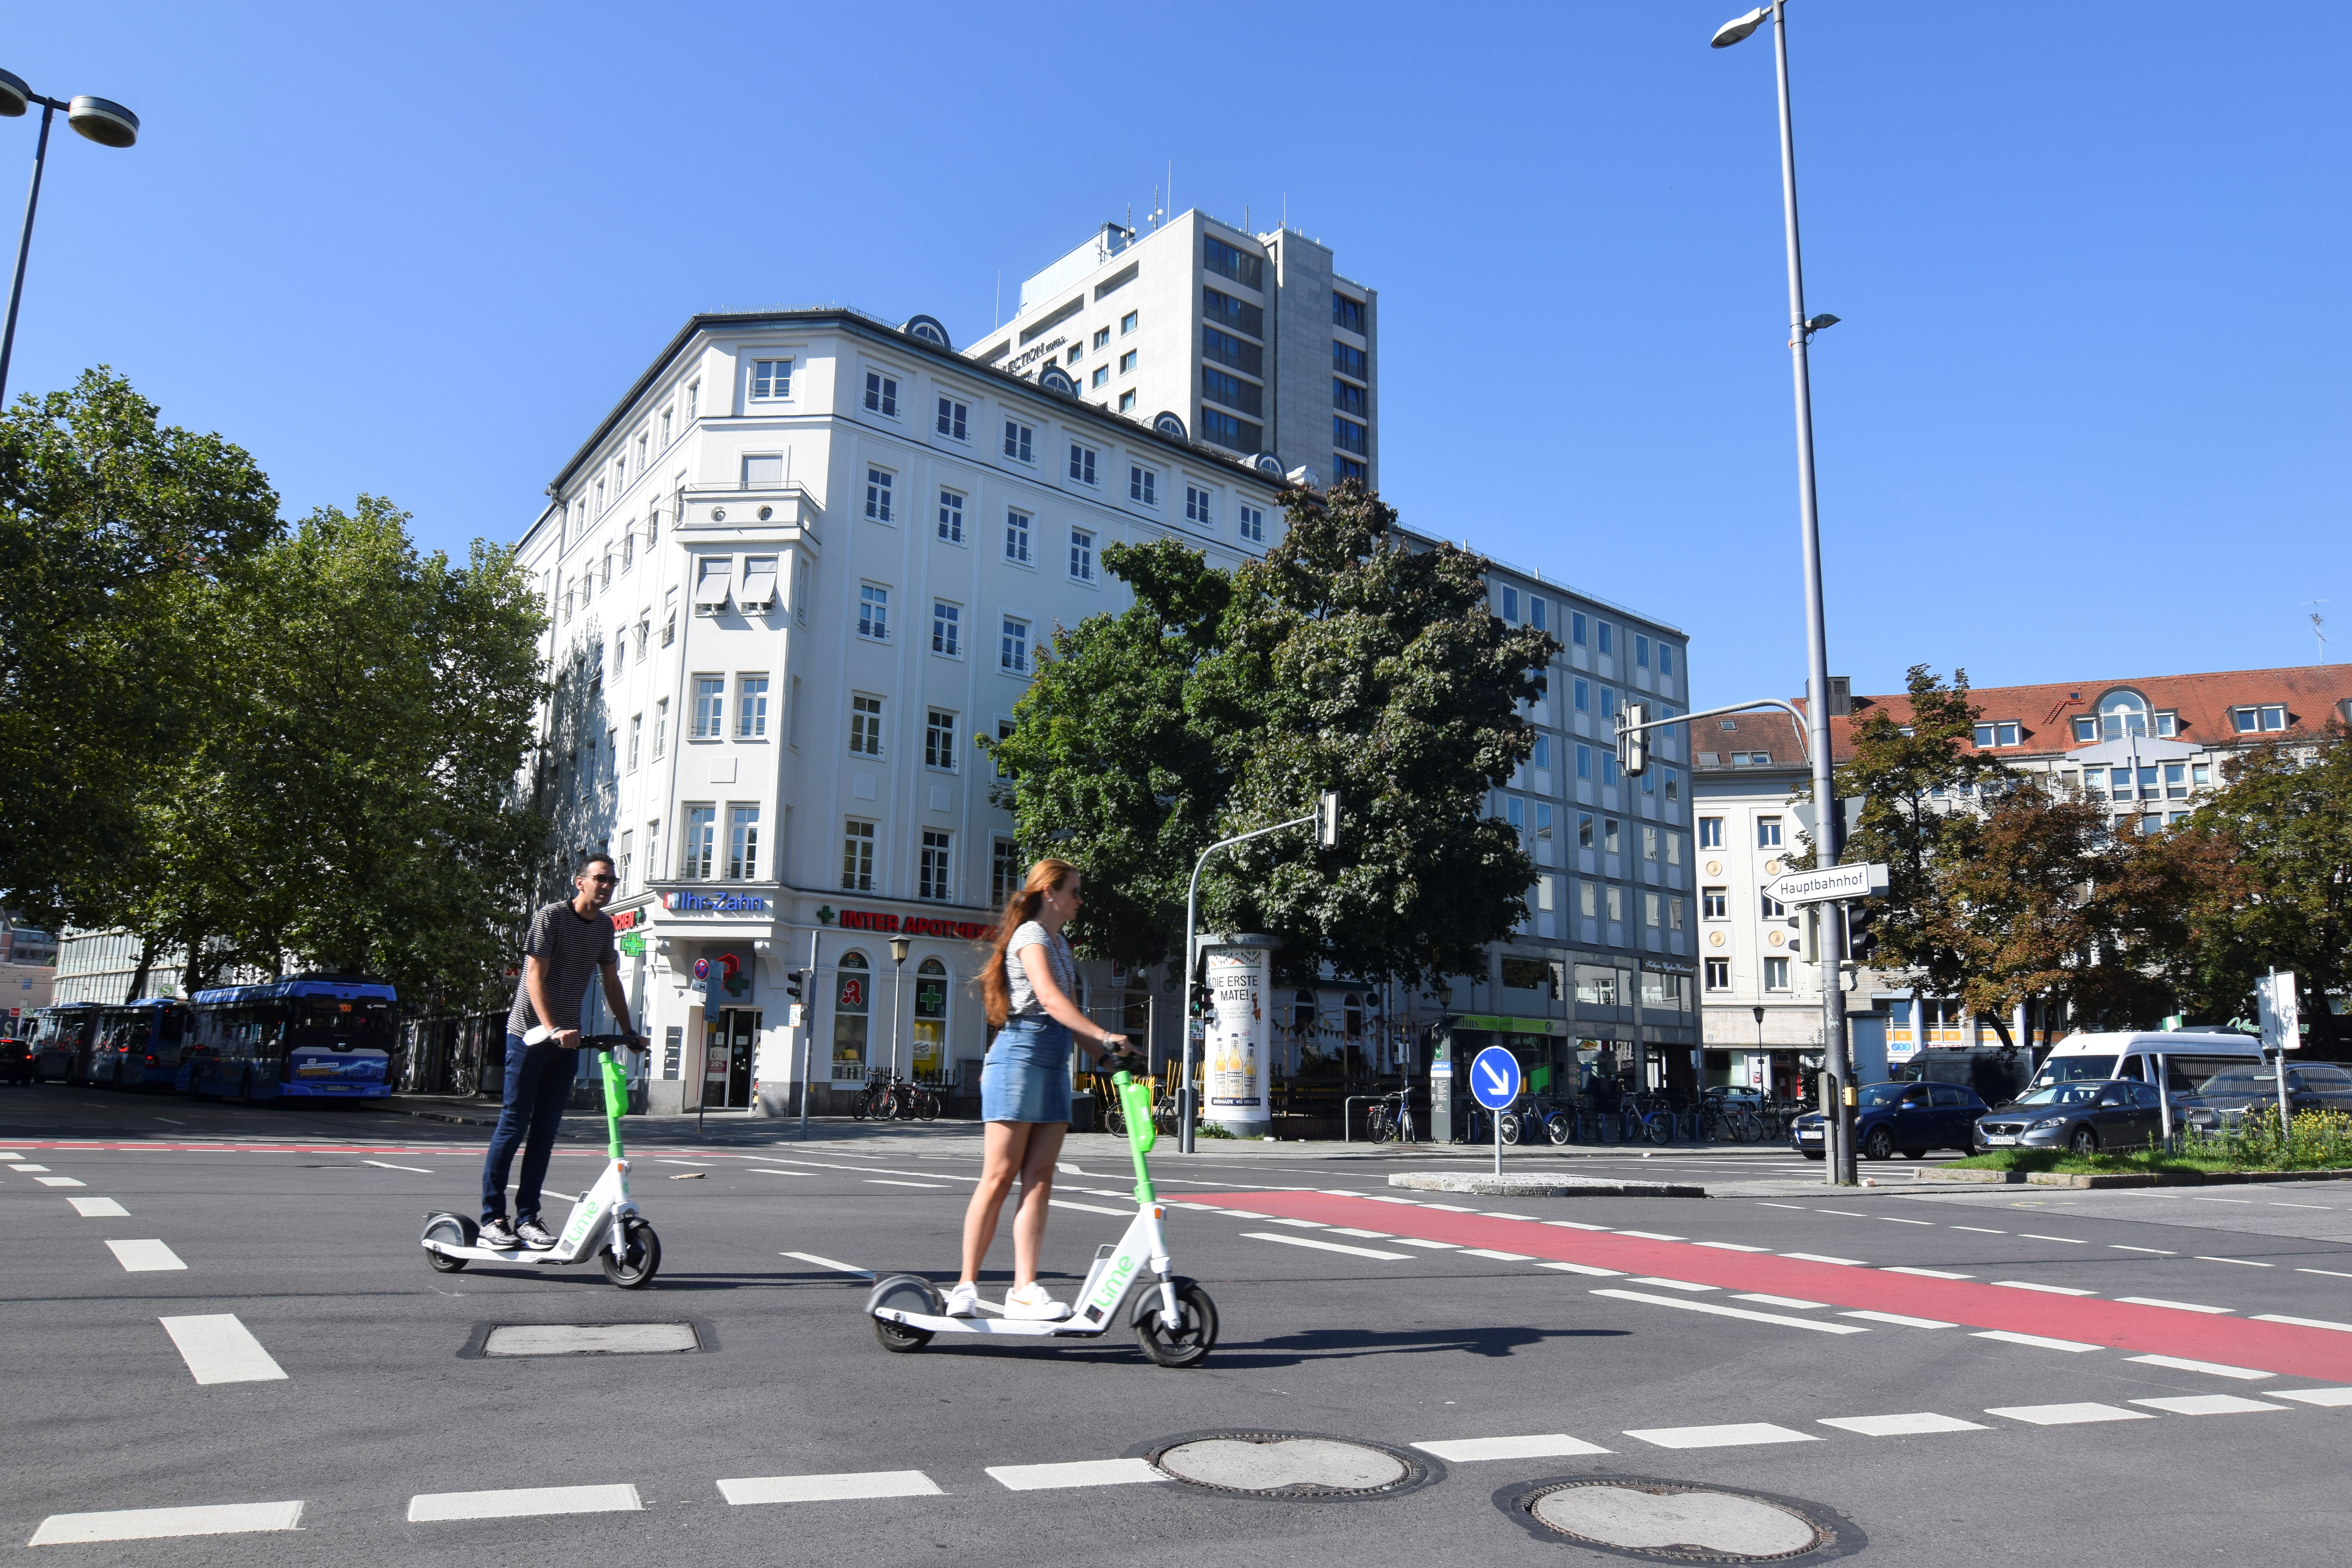 E-scooter users riding scooters rented out from micromobility firm Lime in Munich, Germany, September 5, 2021. Picture taken September 5, 2021. REUTERS/Nick Carey